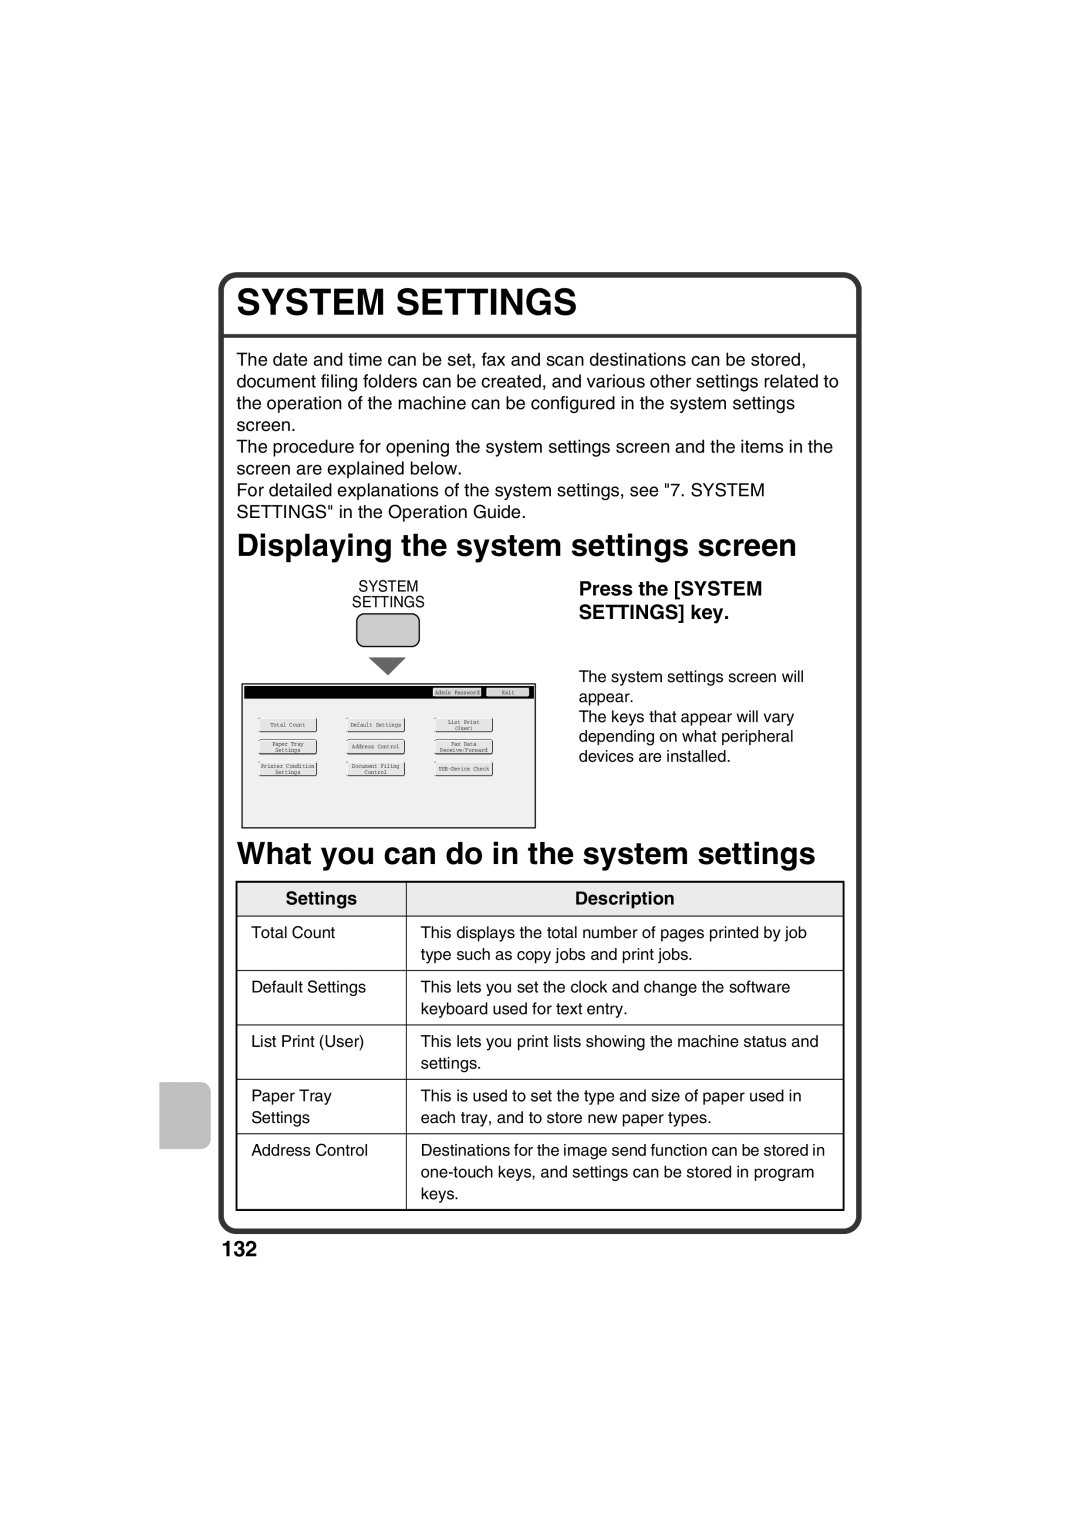 Sharp MX-C311 System Settings, Displaying the system settings screen, What you can do in the system settings, Description 